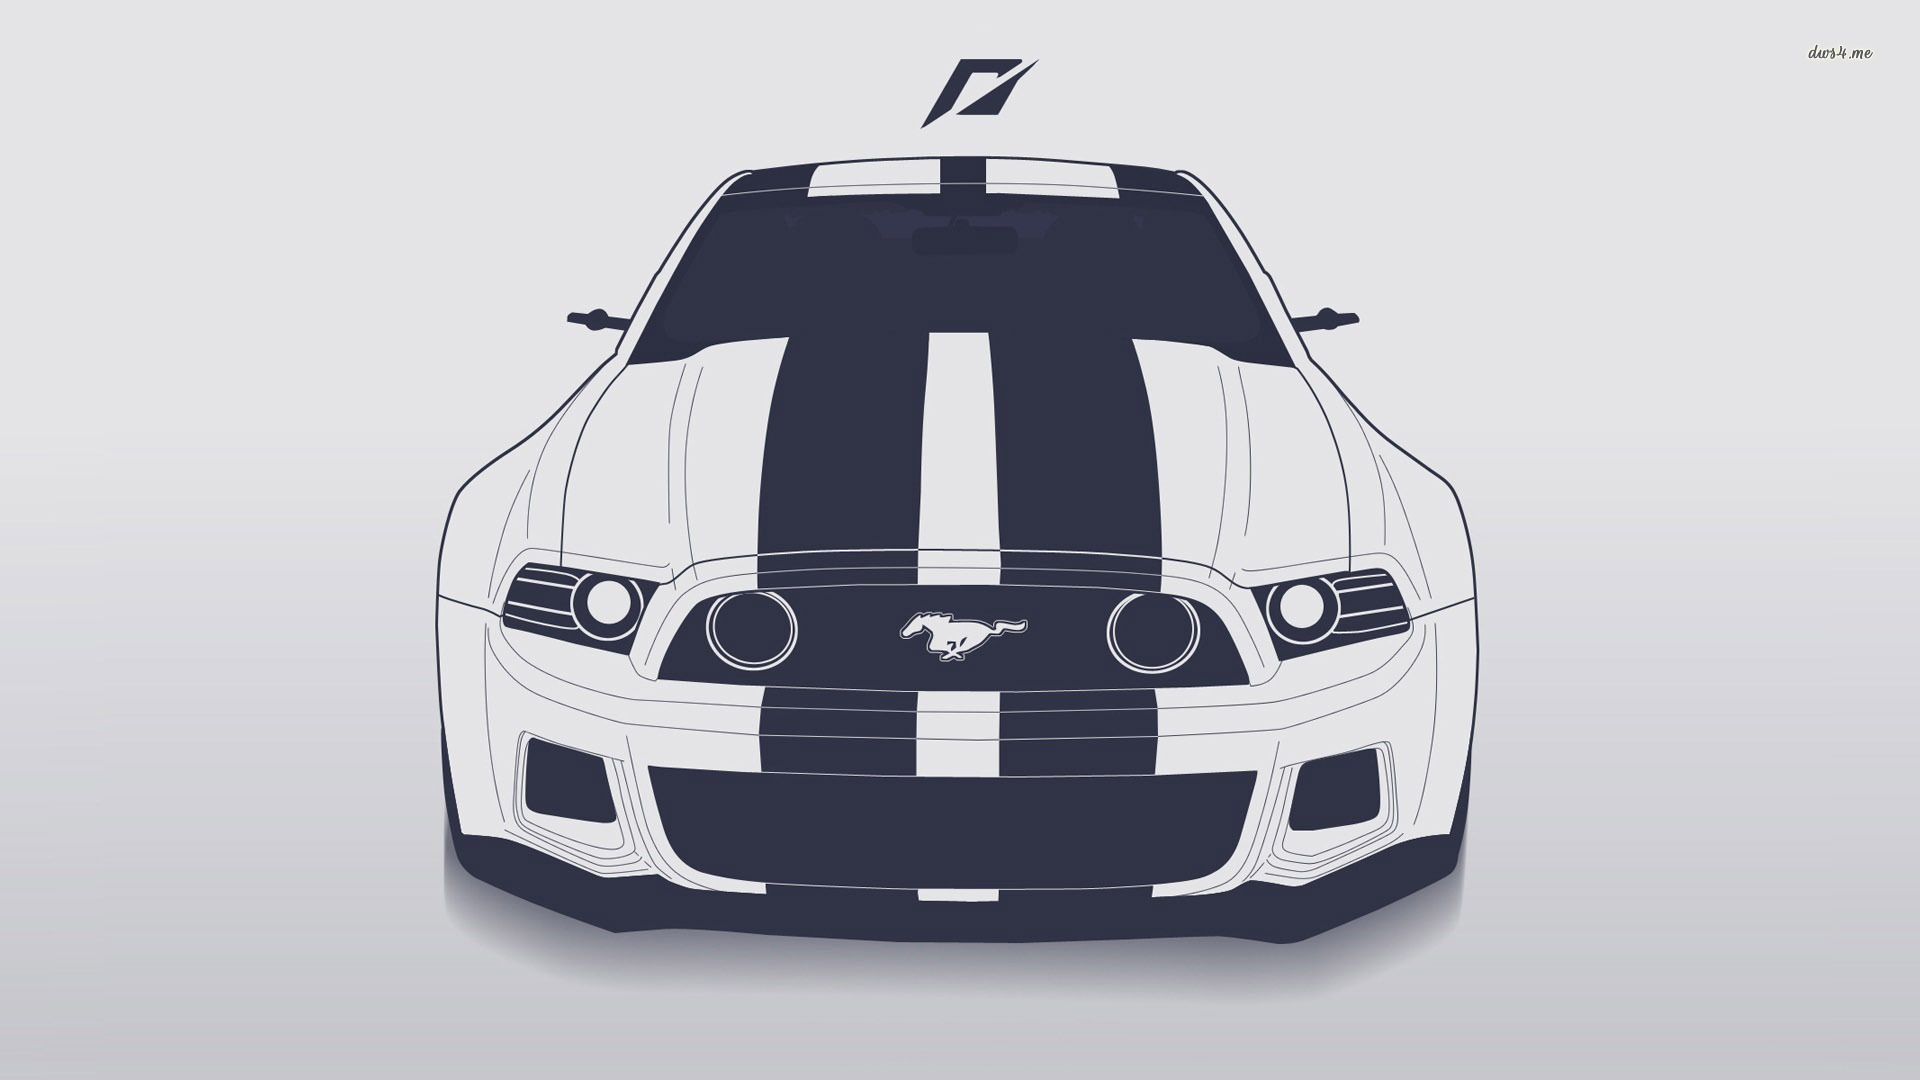 Ford Mustang Fb Cover - HD Wallpaper 